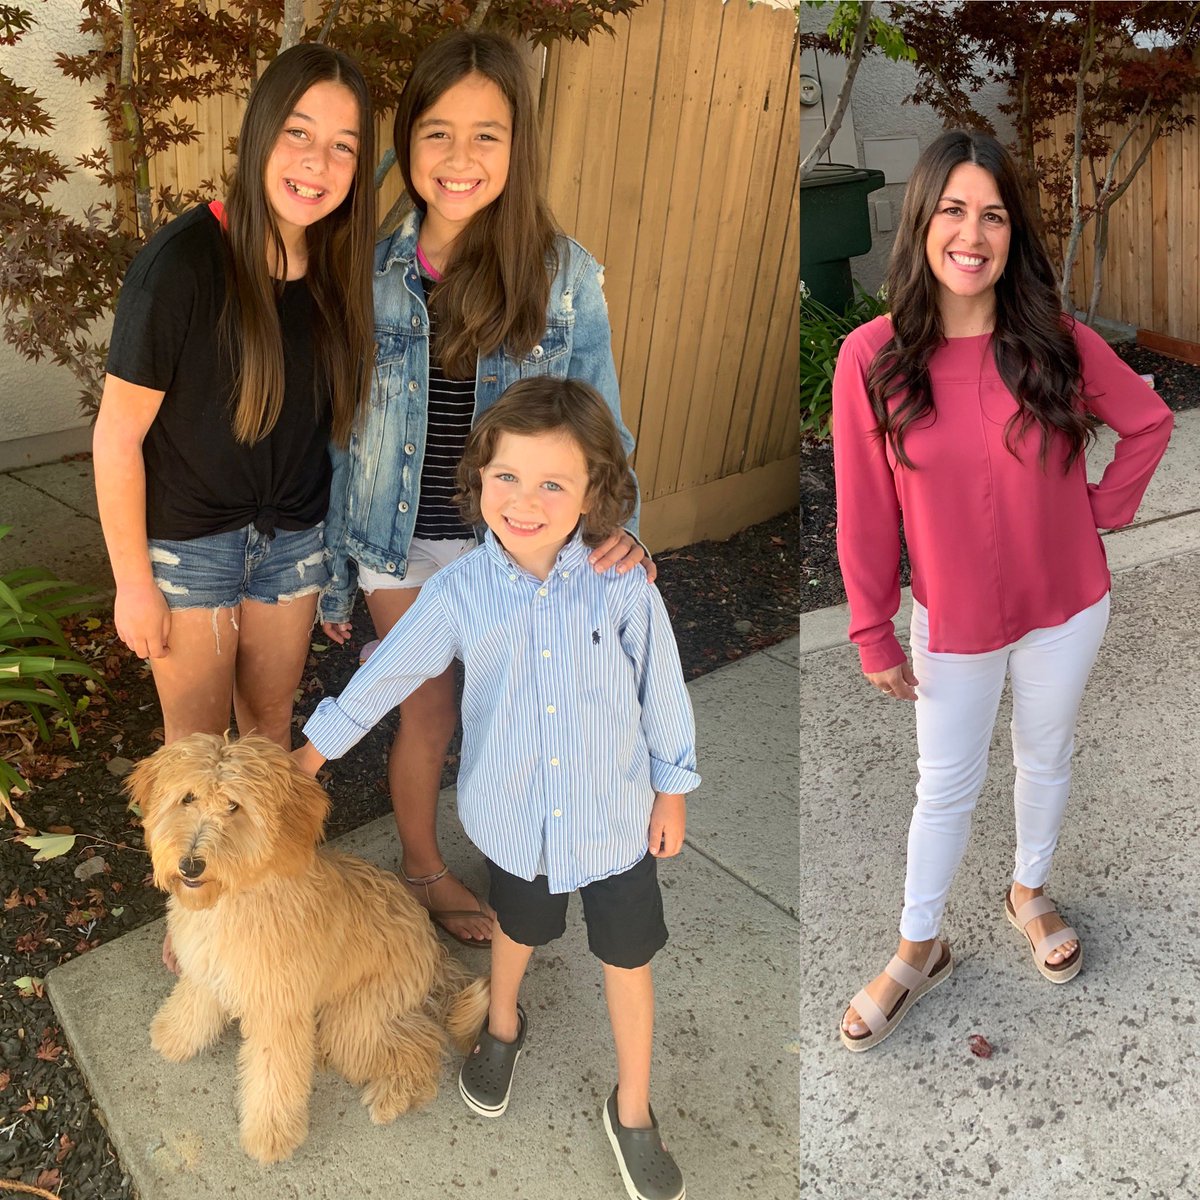 First week of school photos! Liz teaching Kinder, and the kids are now in 8th, 5th, and Kinder. Hope families appreciate how hard educators are working for students!